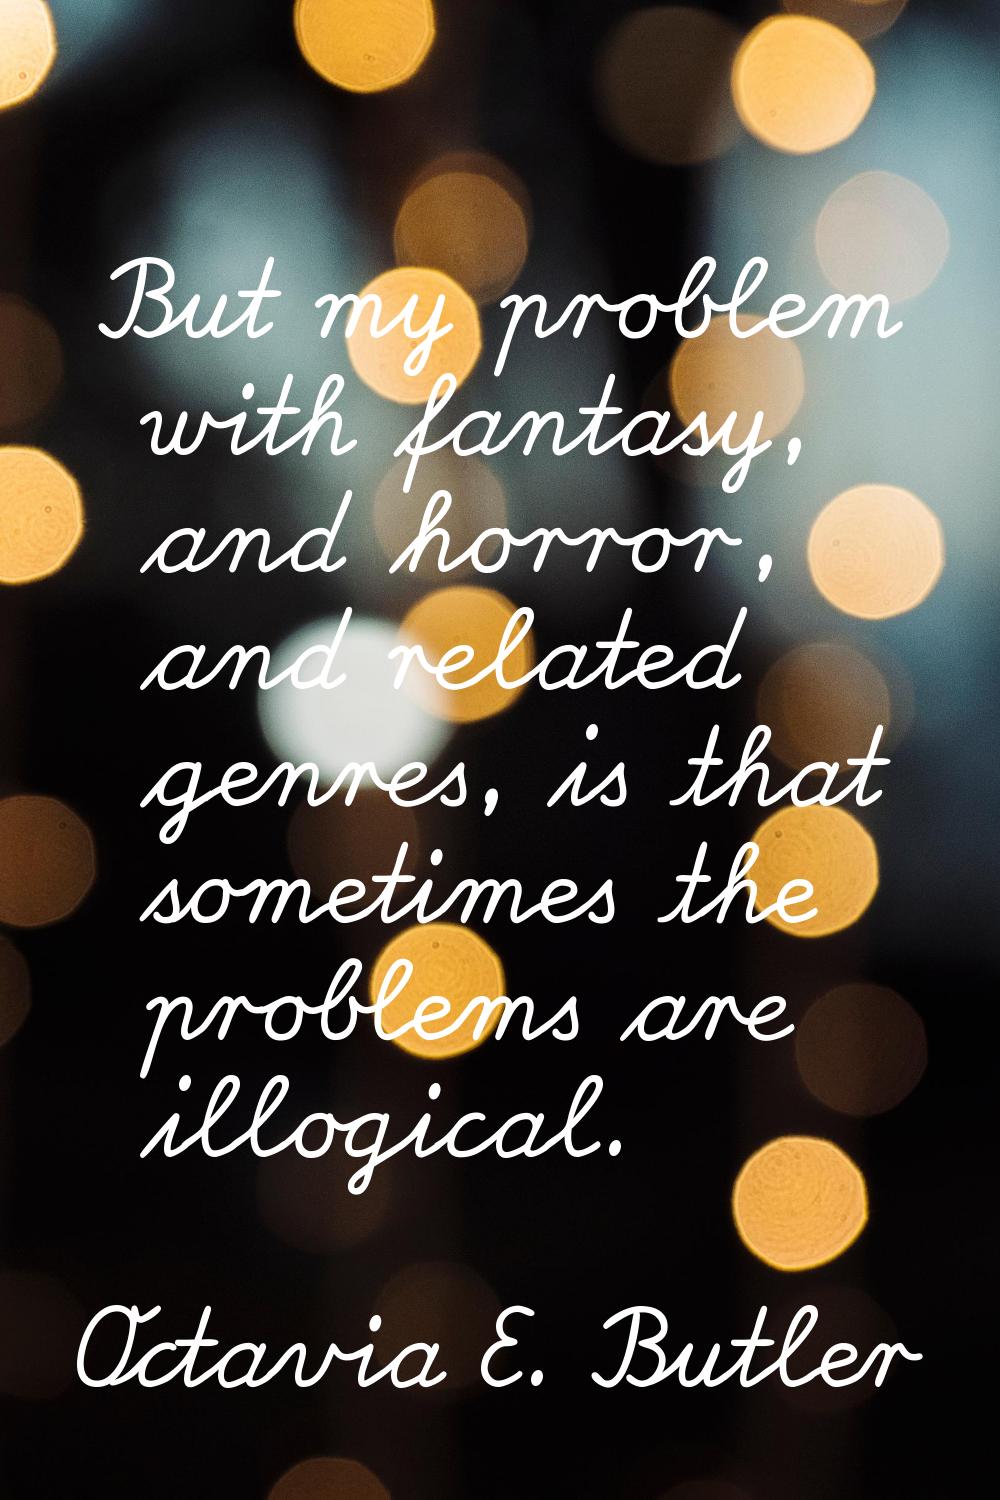 But my problem with fantasy, and horror, and related genres, is that sometimes the problems are ill